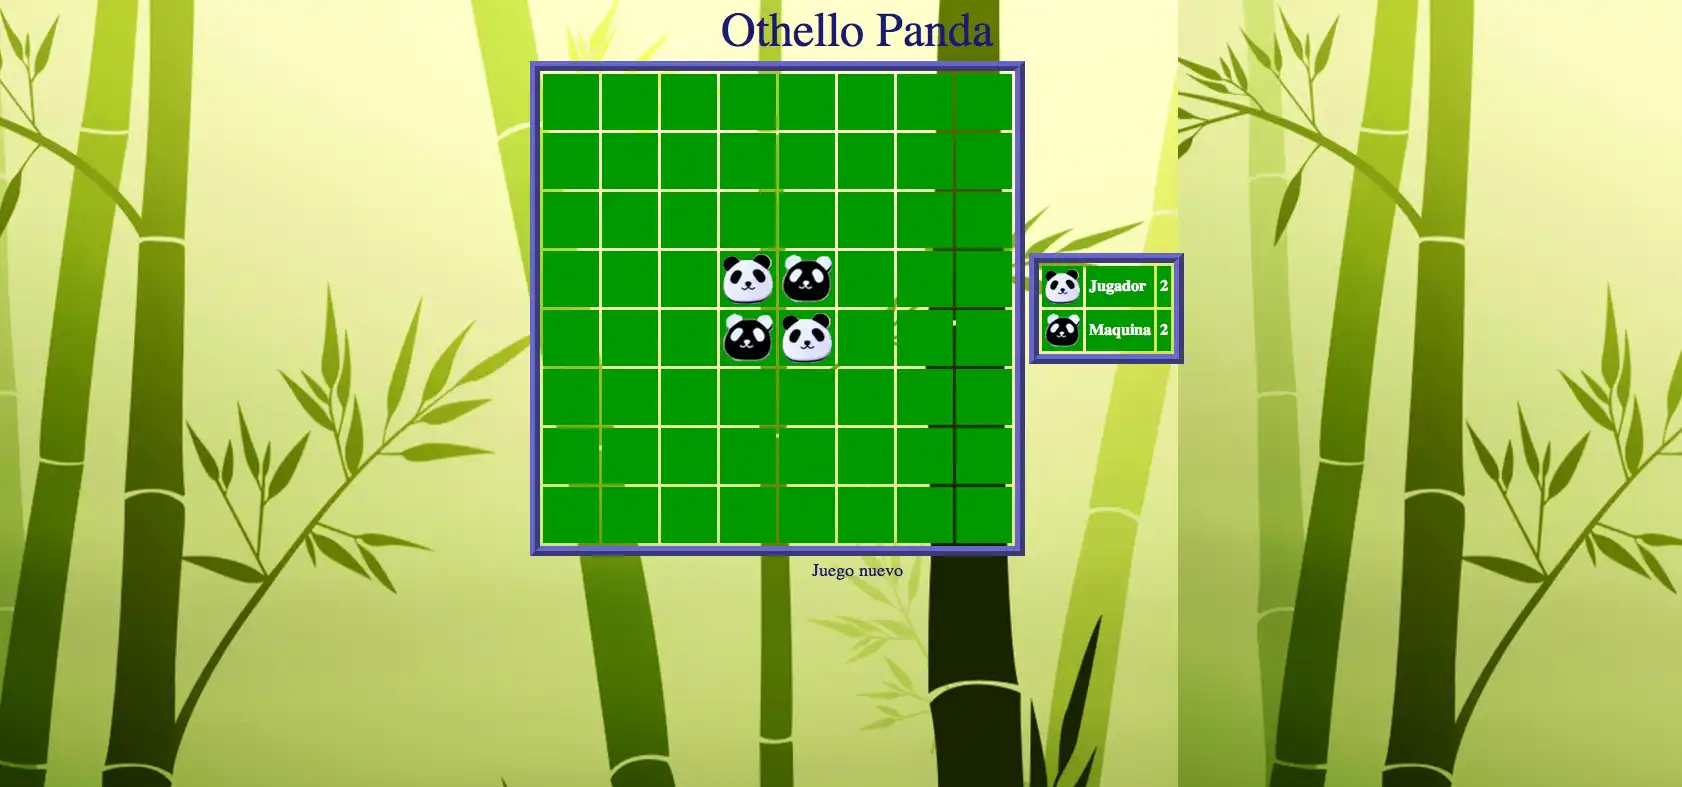 Download web tool or web app Othello Panda to run in Linux online